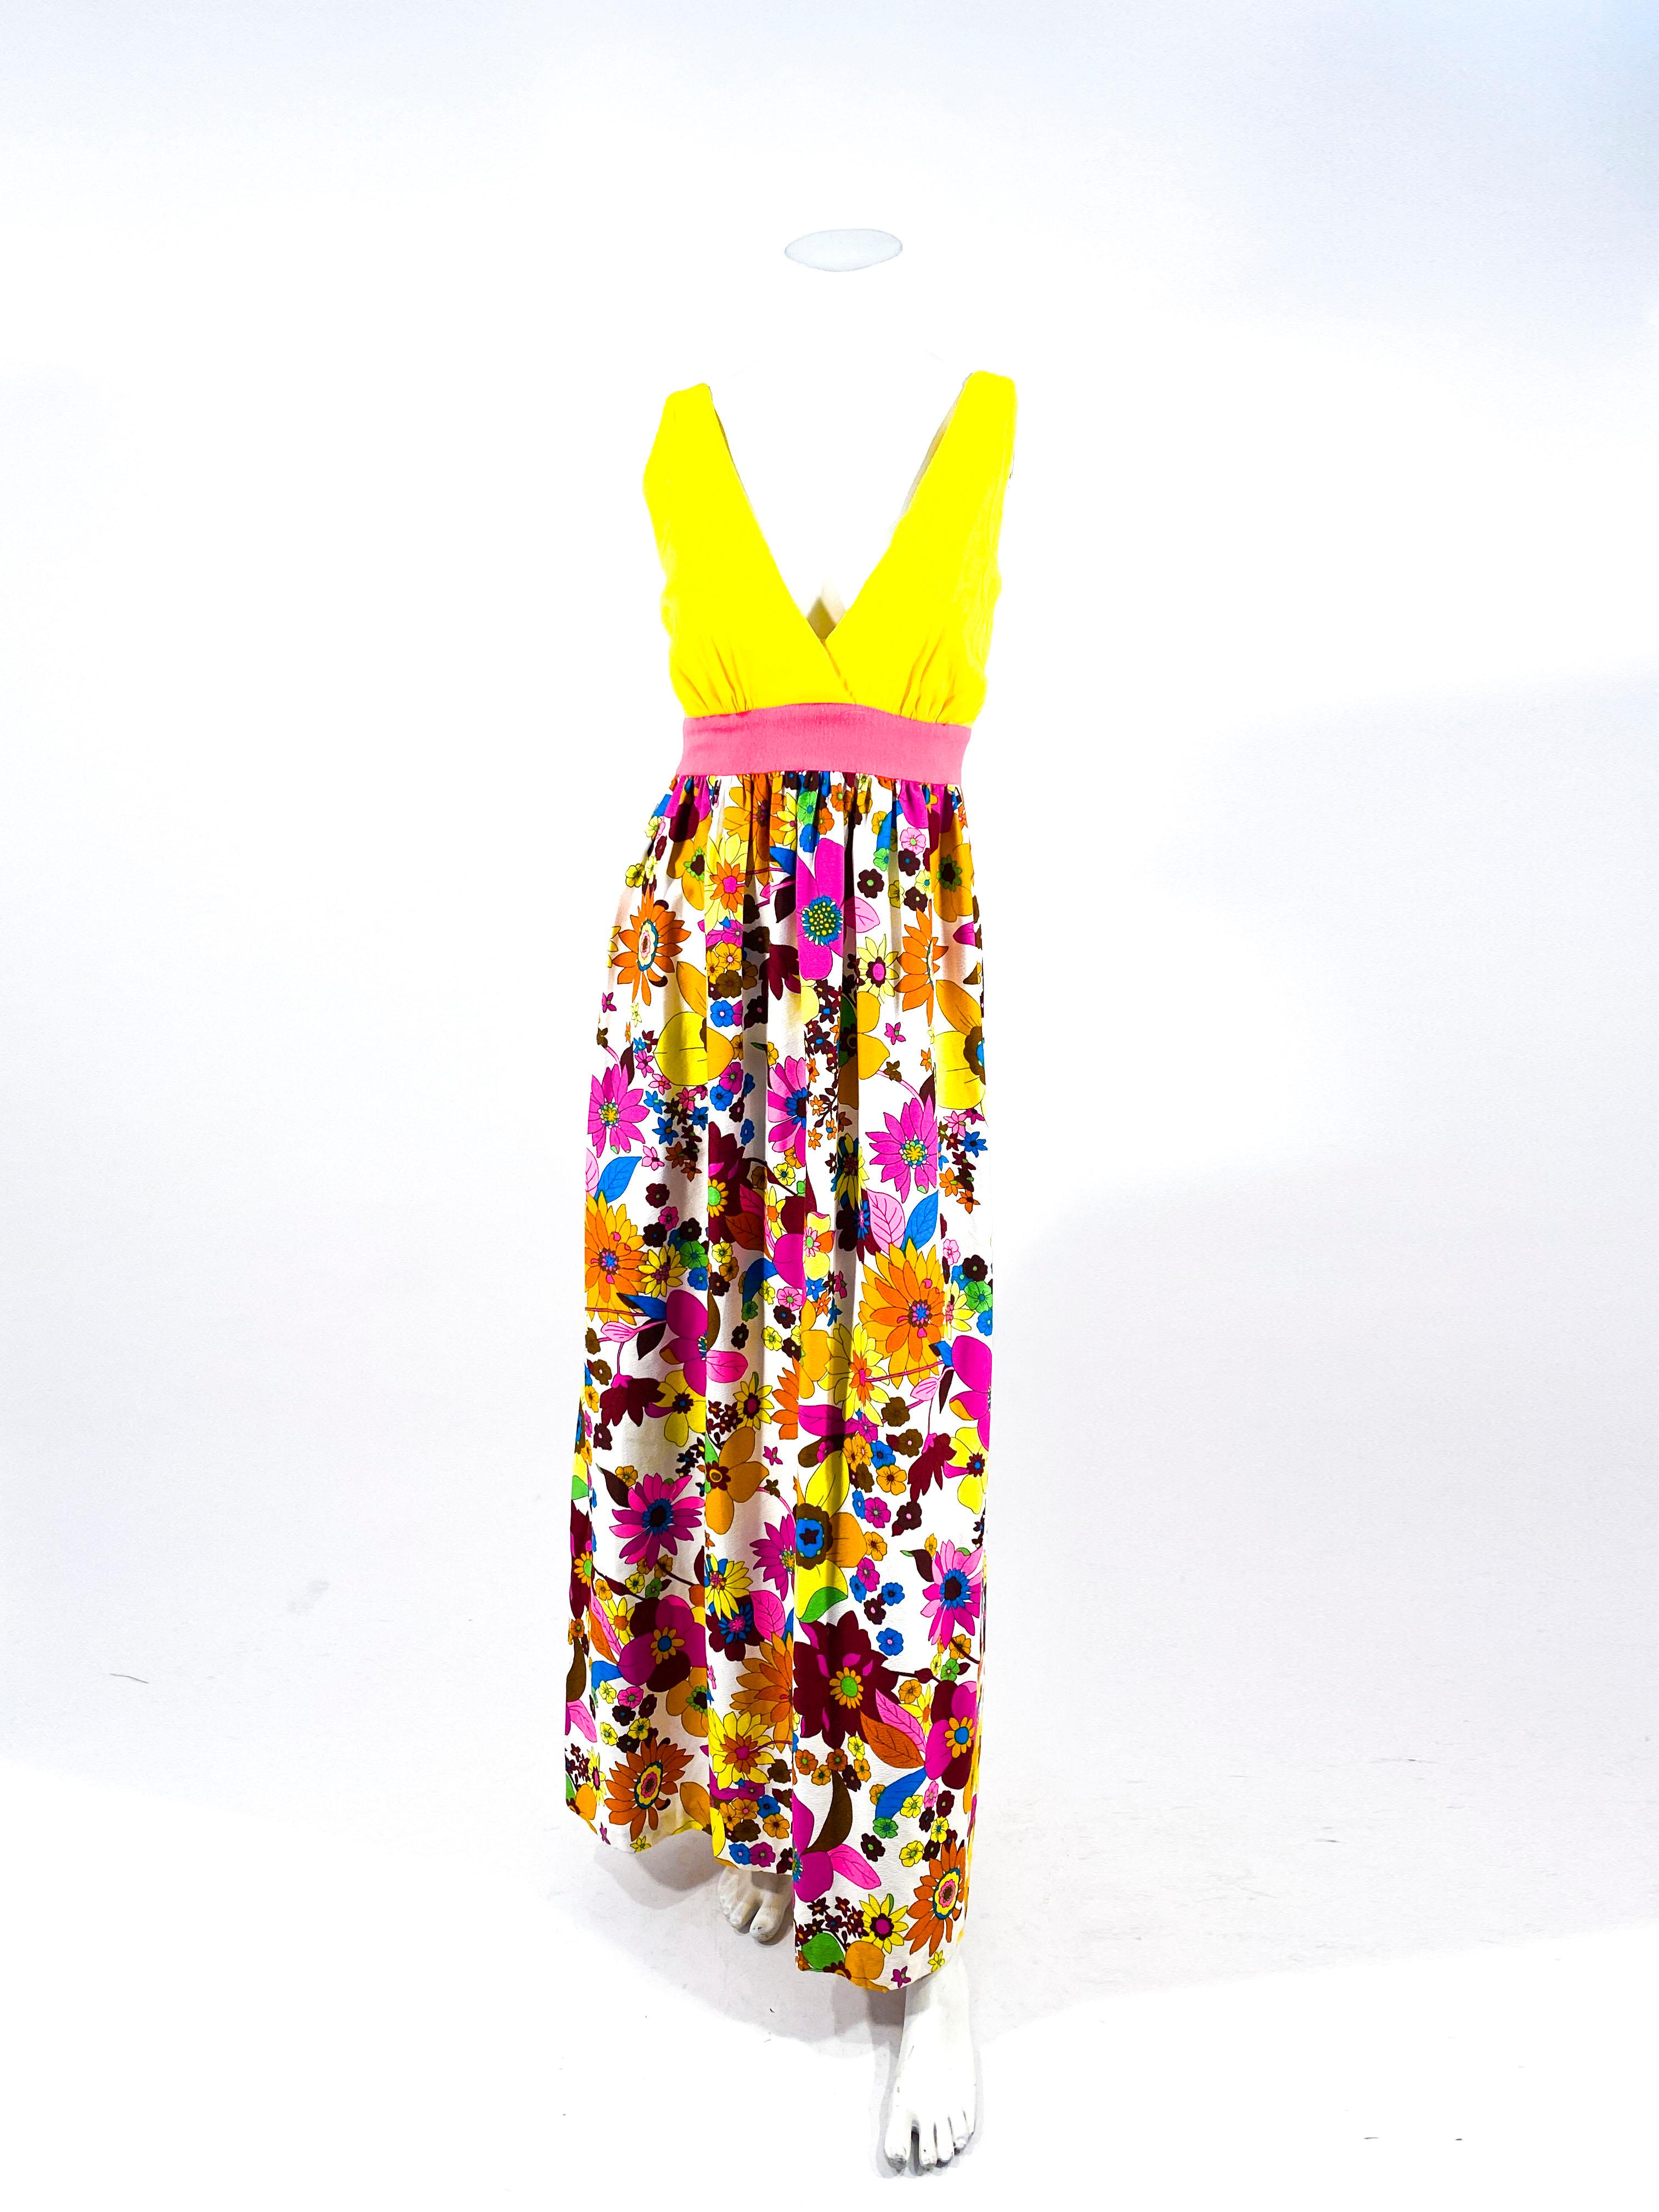 1970s Kamehameha label Hawaiian floral printed bark cloth maxi day dress featuring vibrant tones of magenta, rust, blue green, and yellow. The bight yellow faux wrap bodice is complementary to the hot pink applied waistband and full printed skirt.